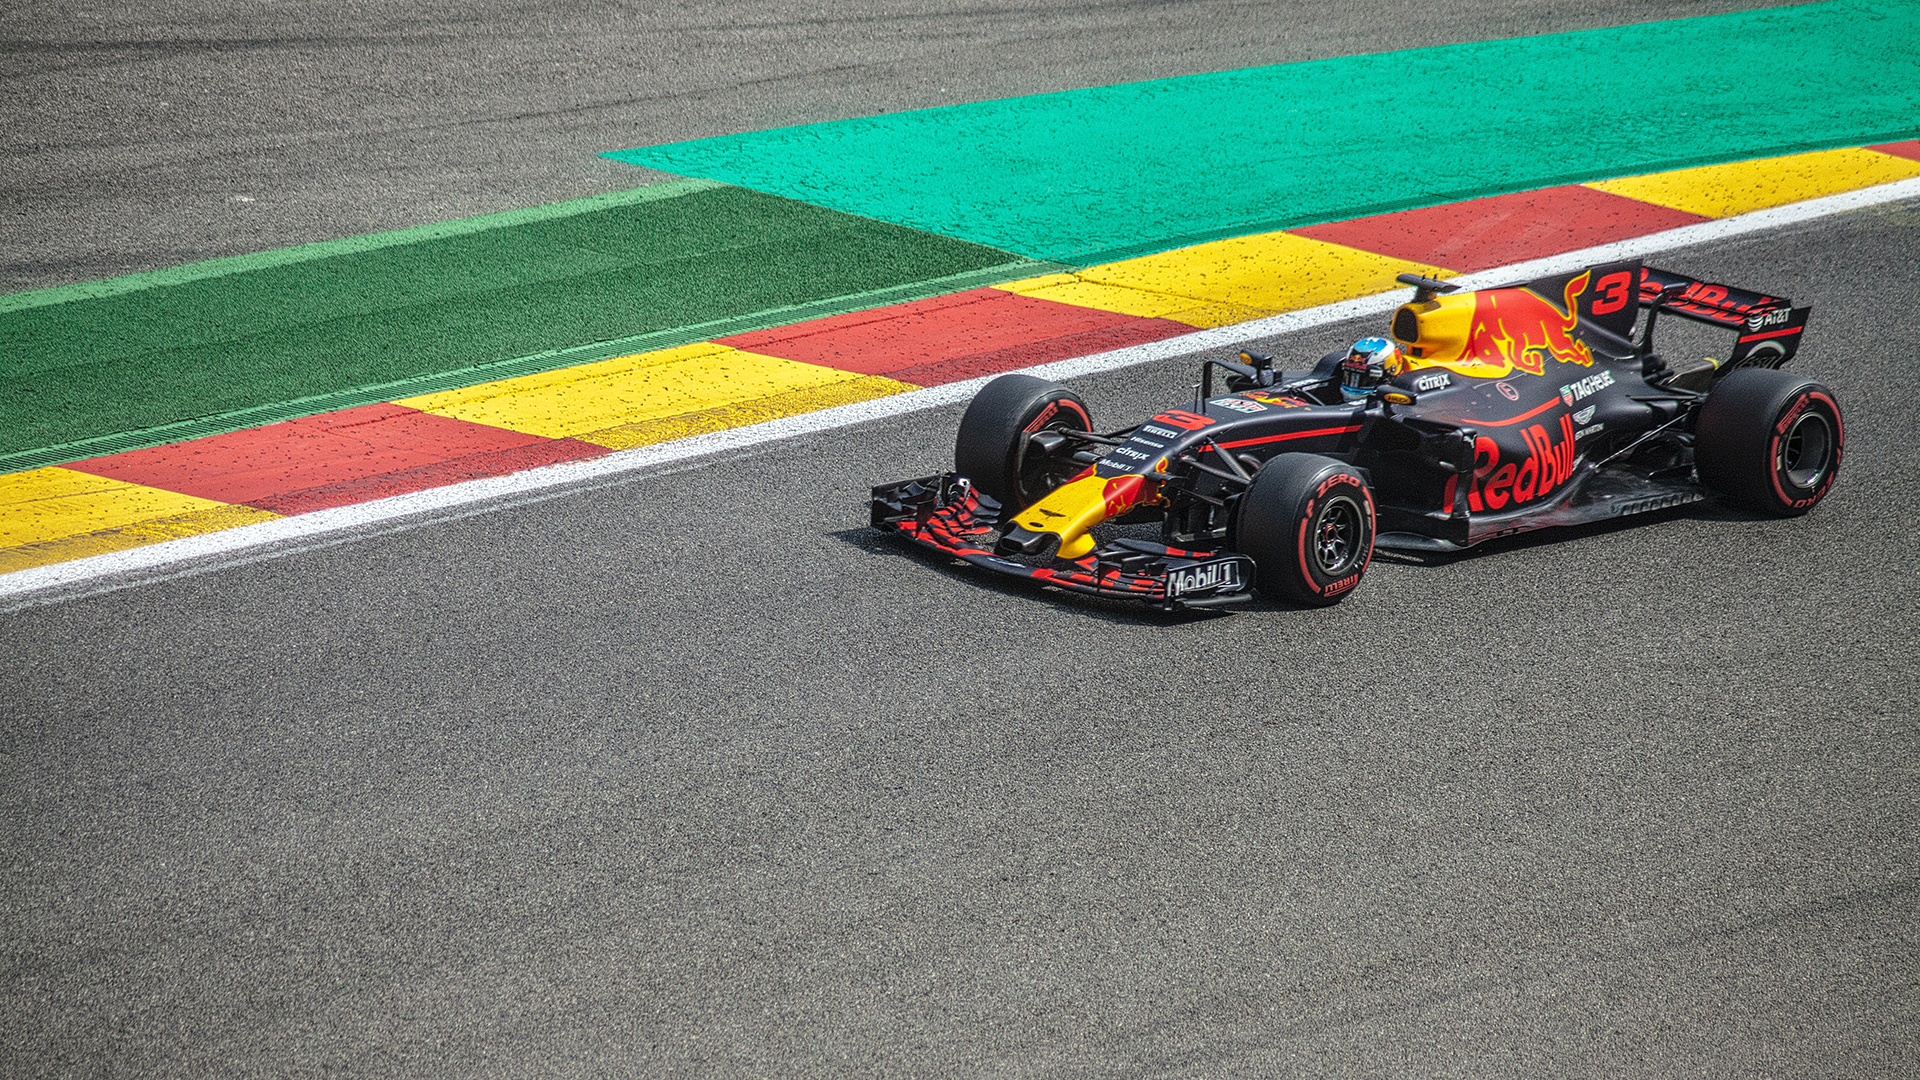 unsplash-logoFerhat Deniz Fors Daniel Ricciardo driving the Renault-powered Red Bull RB13 at the Circuit de Spa-Francorchamps in 2017. With a disappointing inaugral season at the Renault team, will Ricciardo look to move into more competitive machinery?